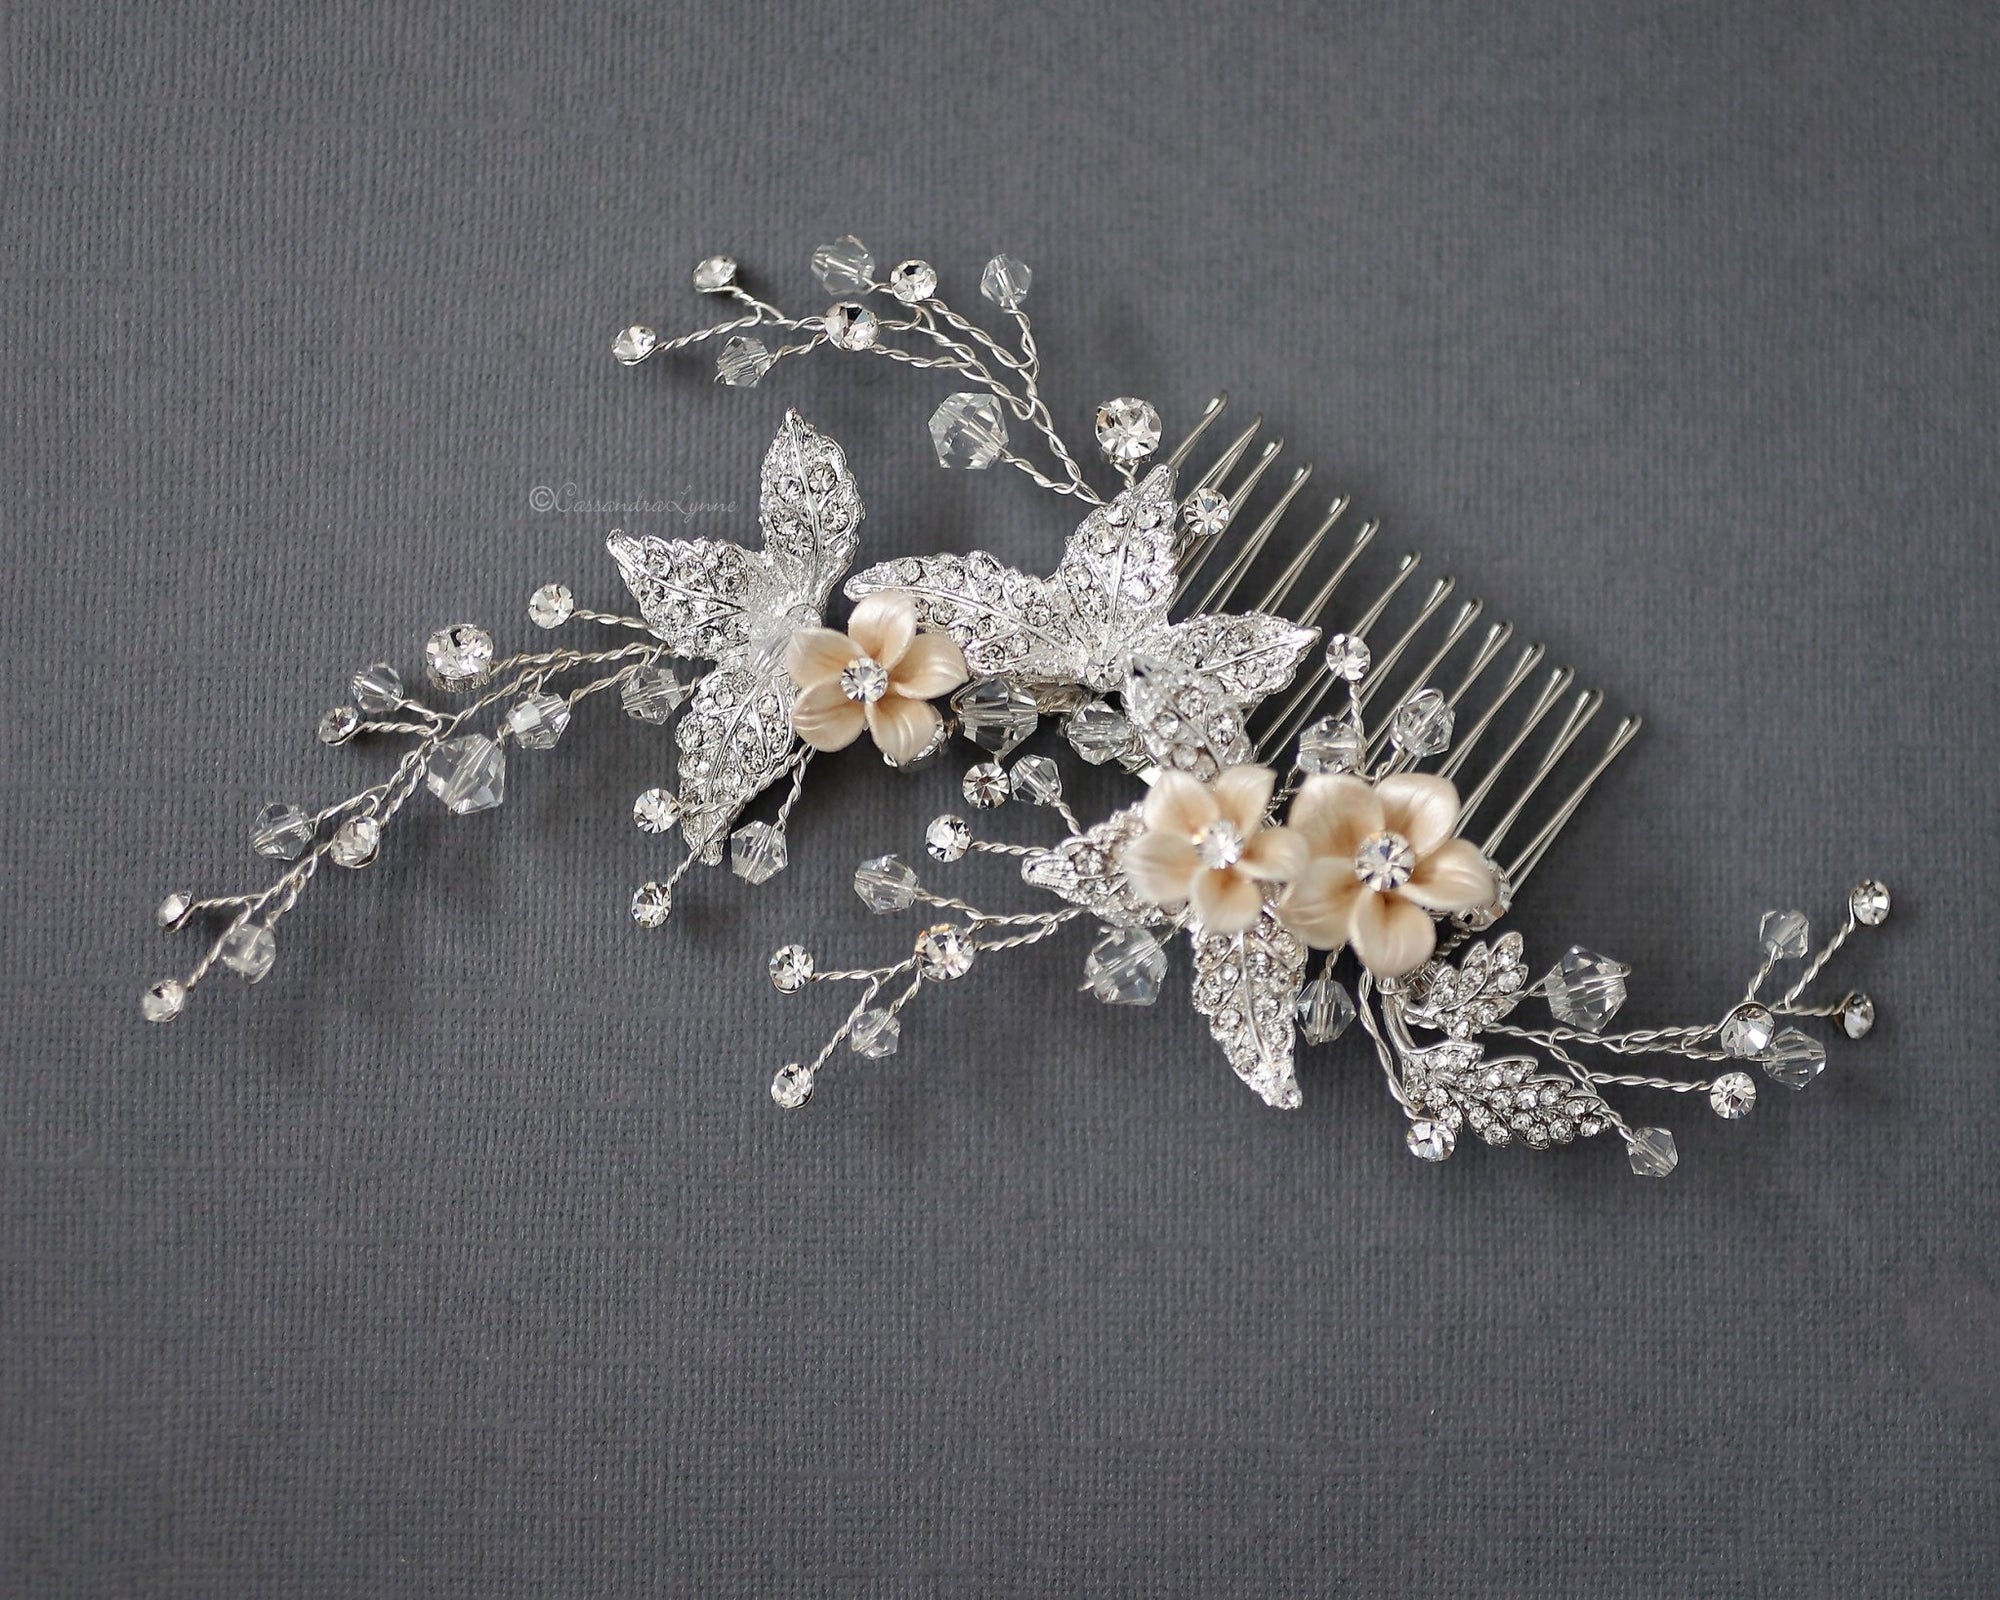 Wedding Comb of Porcelain Flowers Leaves and Crystals - Cassandra Lynne